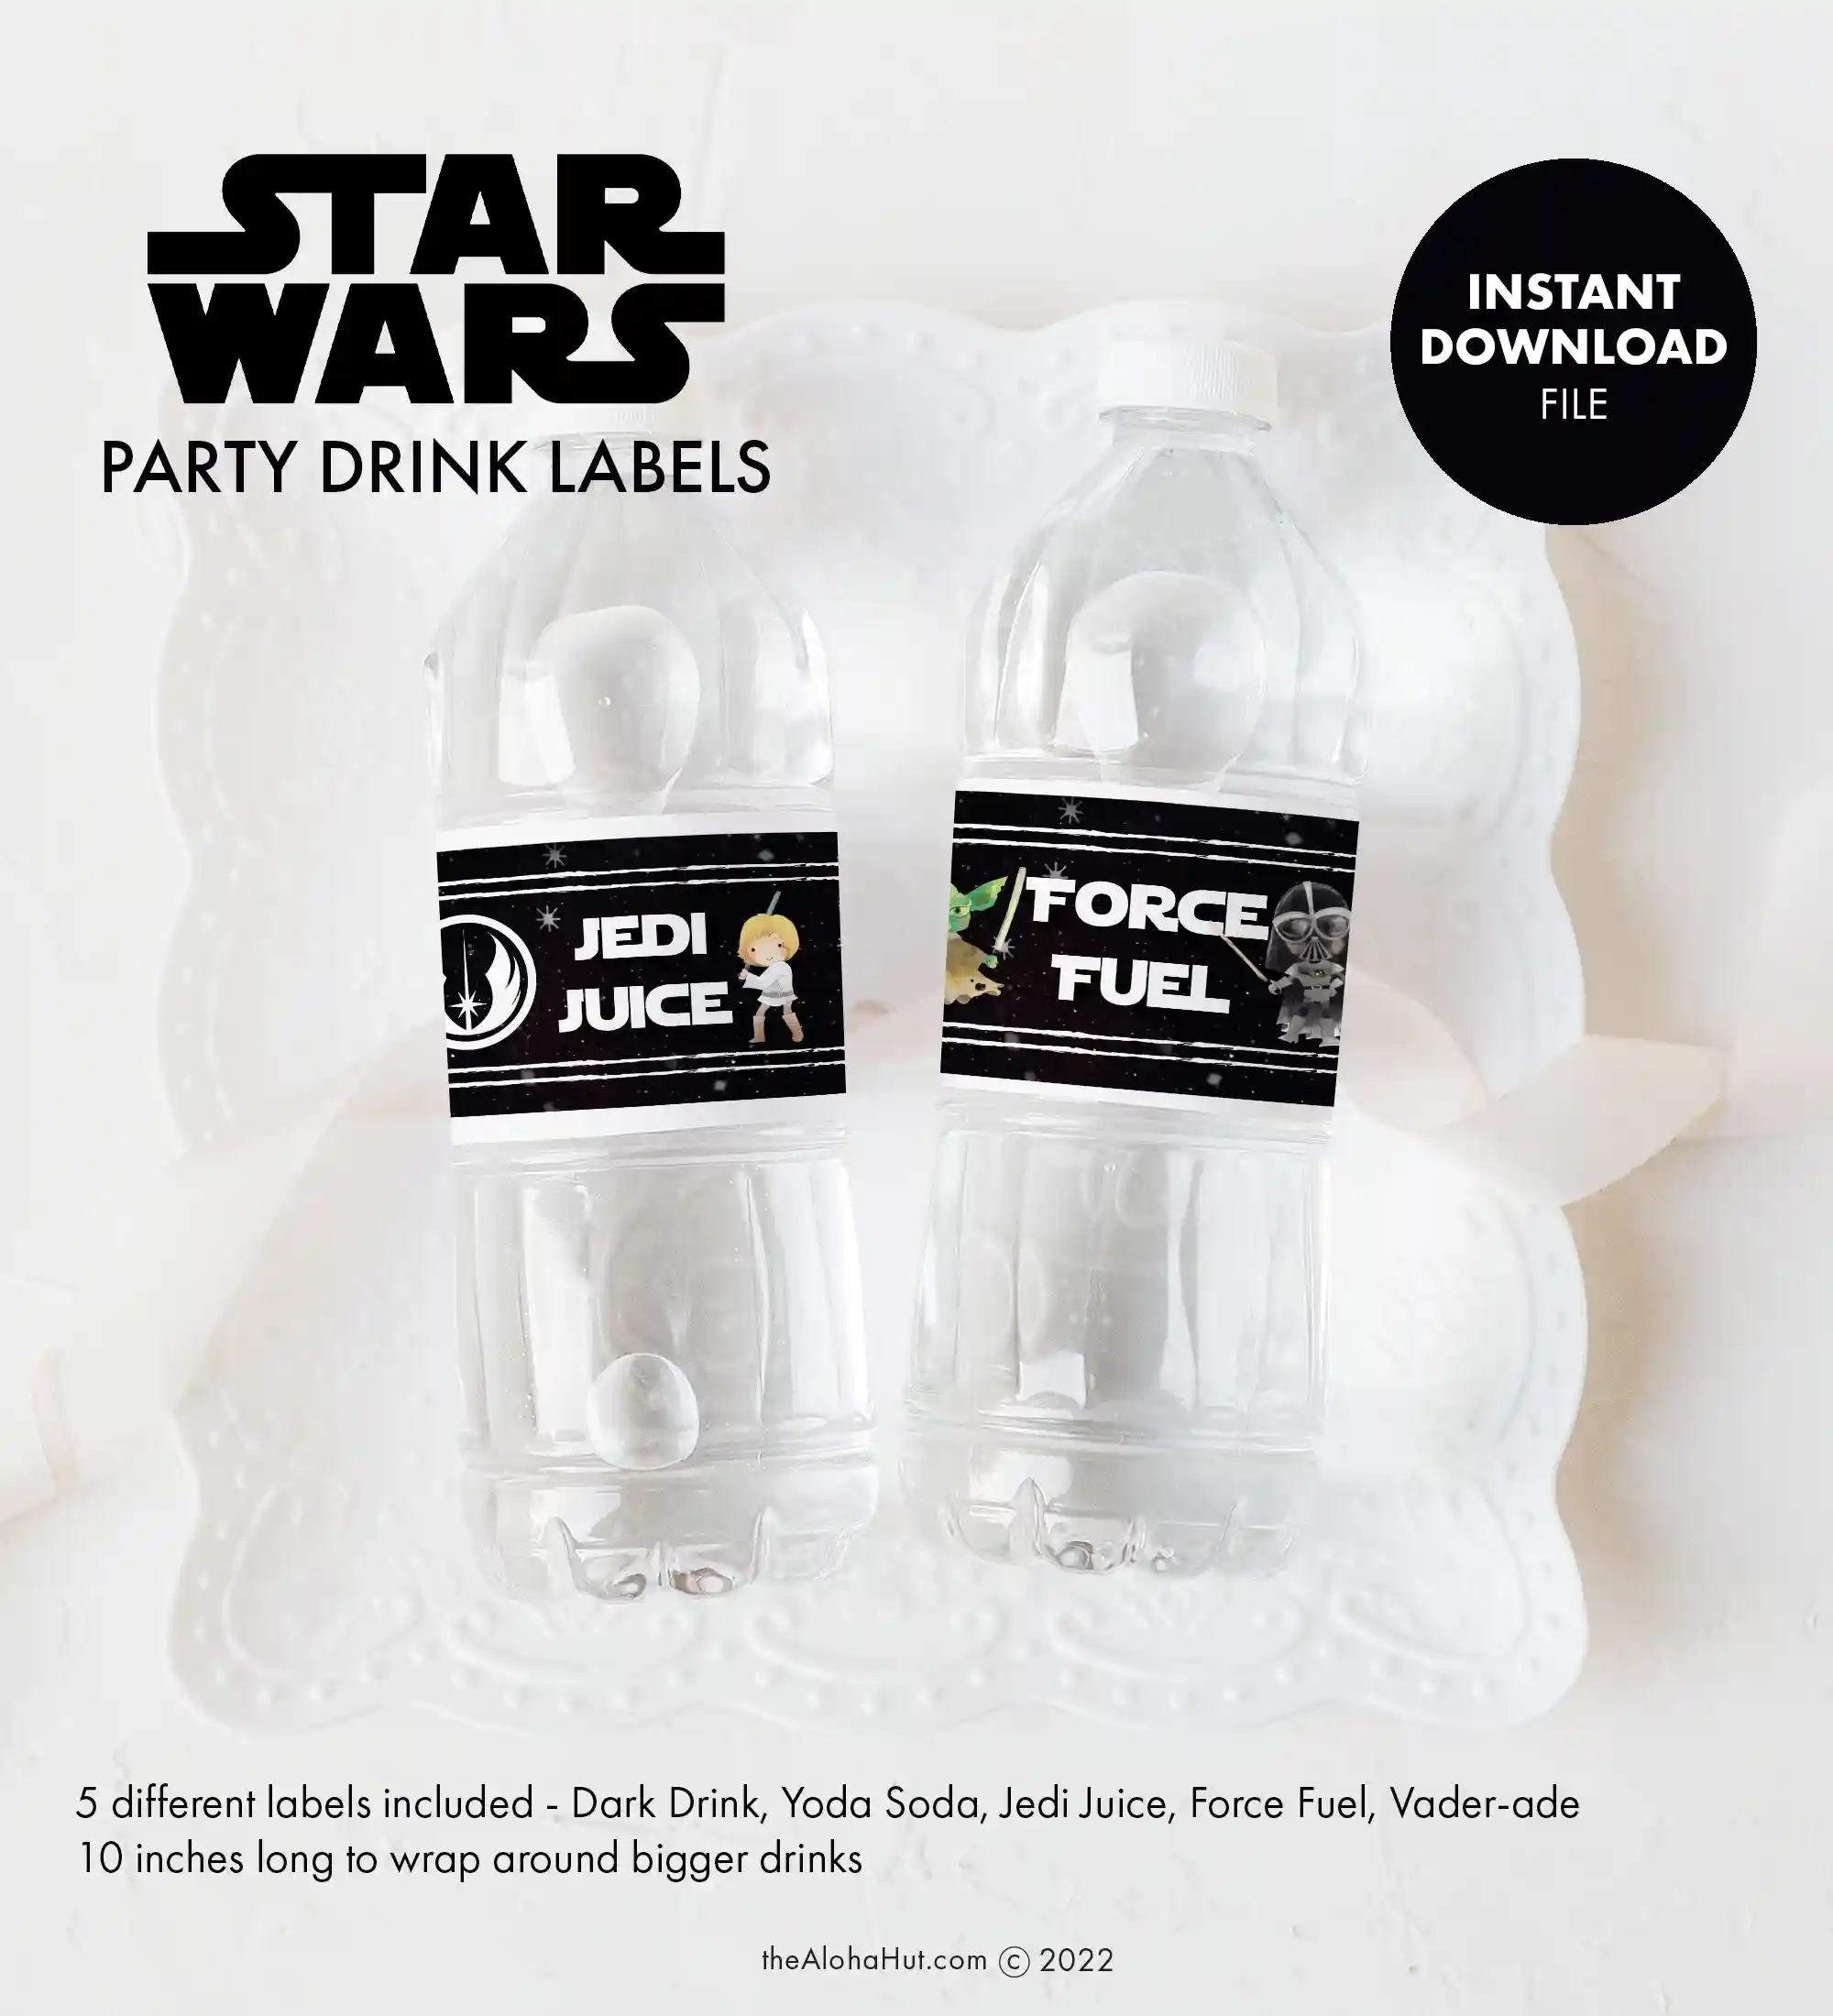 Star Wars party ideas, activities, birthday party games, decorations, and prints. Ideas and tips and tricks for throwing the best Star Wars themed kids birthday party, baby shower, or one with the force celebration. Includes Star Wars printable games, decorations (cupcake toppers, banners, gift tags, characters) and Star Wars party games (BINGO, scavenger hunt, pin the lightsaber on Yoda or Darth Vader). Drink labels luke skywater, force fuel, jedi juice.